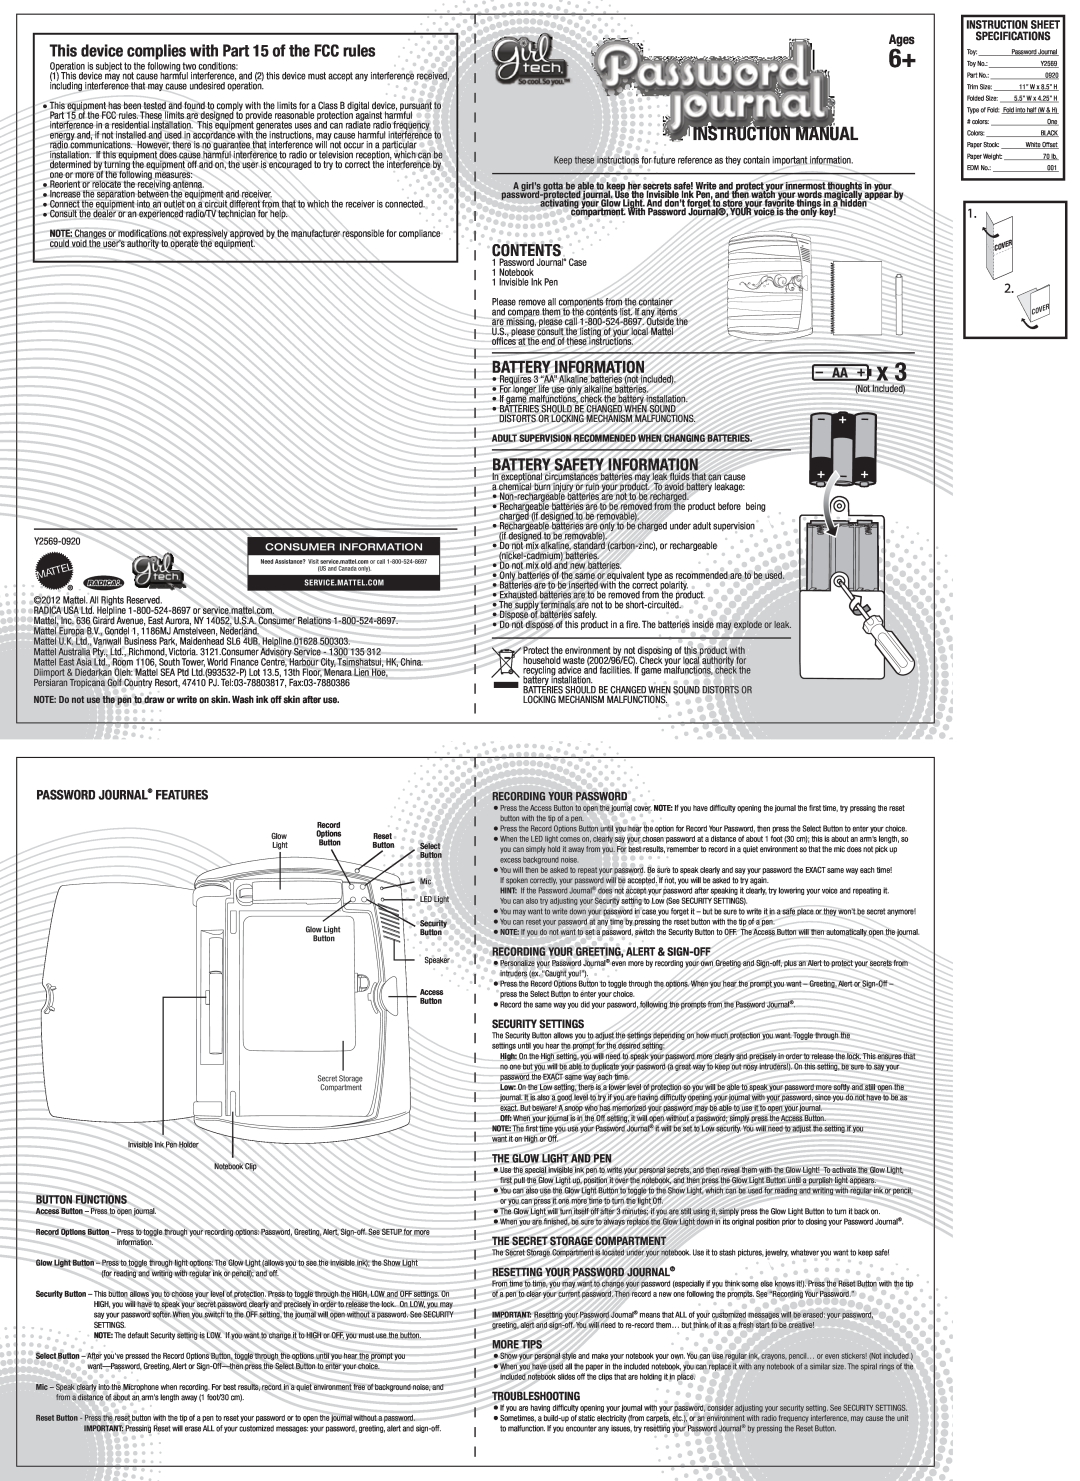 Mattel Y2569 instruction manual AA x, Instruction Manual, This device complies with Part 15 of the FCC rules, Contents 